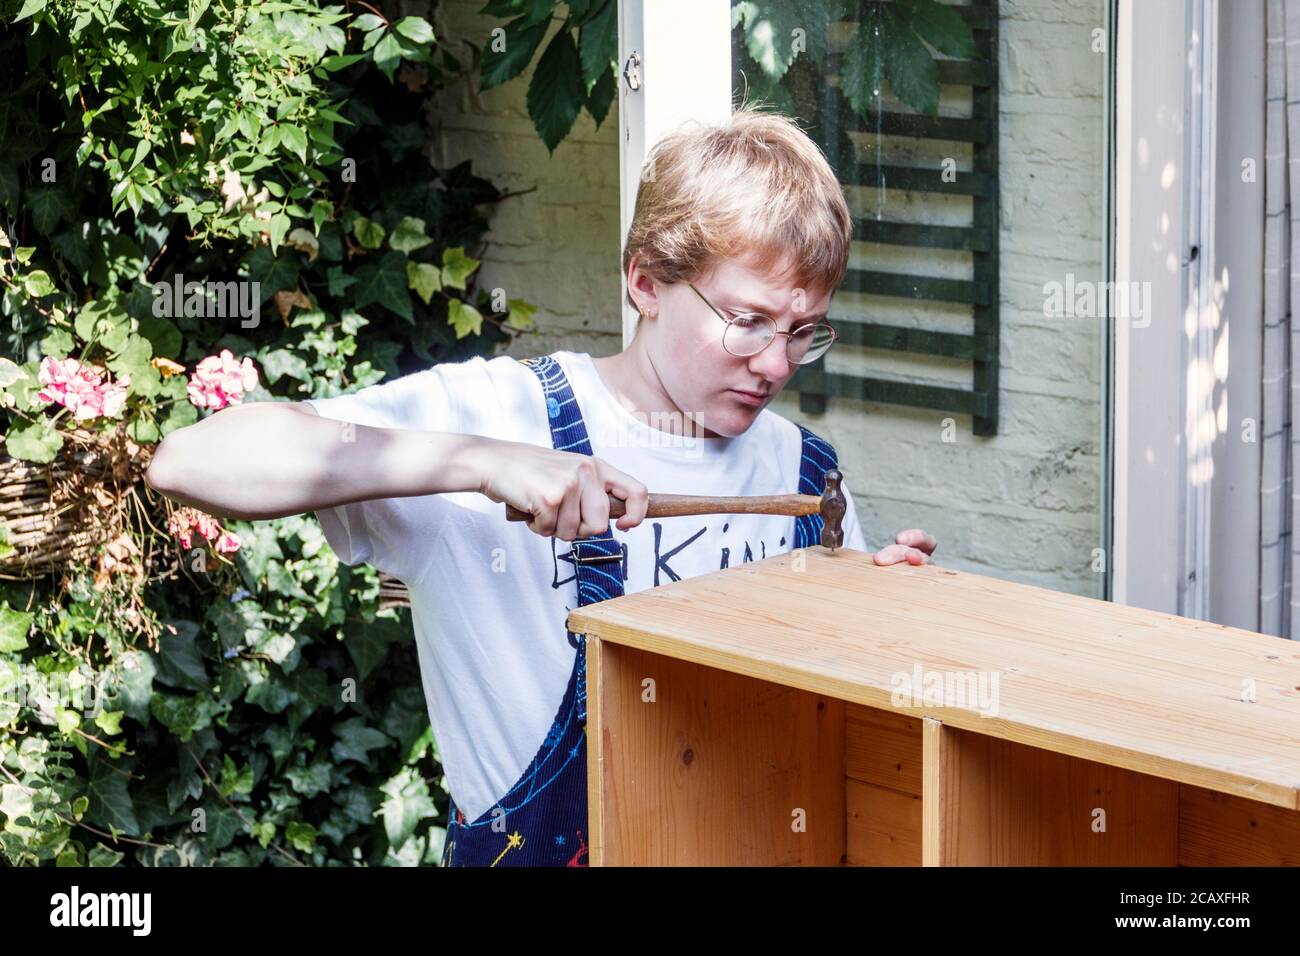 20-year old Caucasian young woman constructing a wooden bookcase at home, London, UK Stock Photo